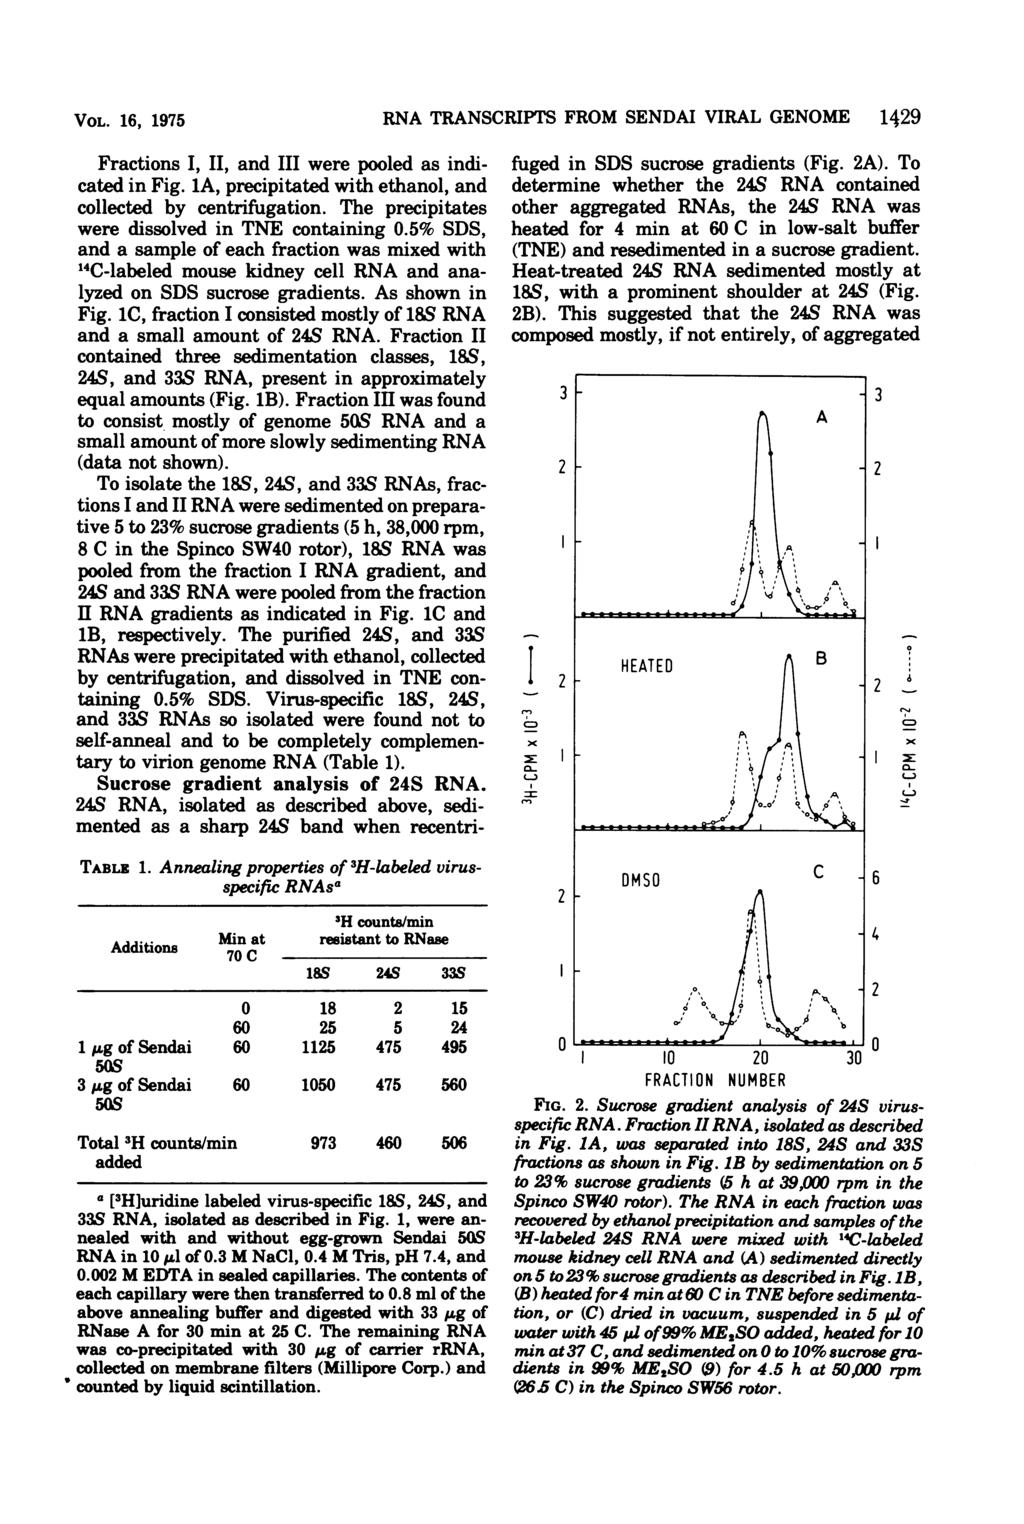 VOL. 16, 1975 Fractions I, II, and III were pooled as indicated in Fig. 1A, precipitated with ethanol, and collected by centrifugation. The precipitates were dissolved in TNE containing 0.